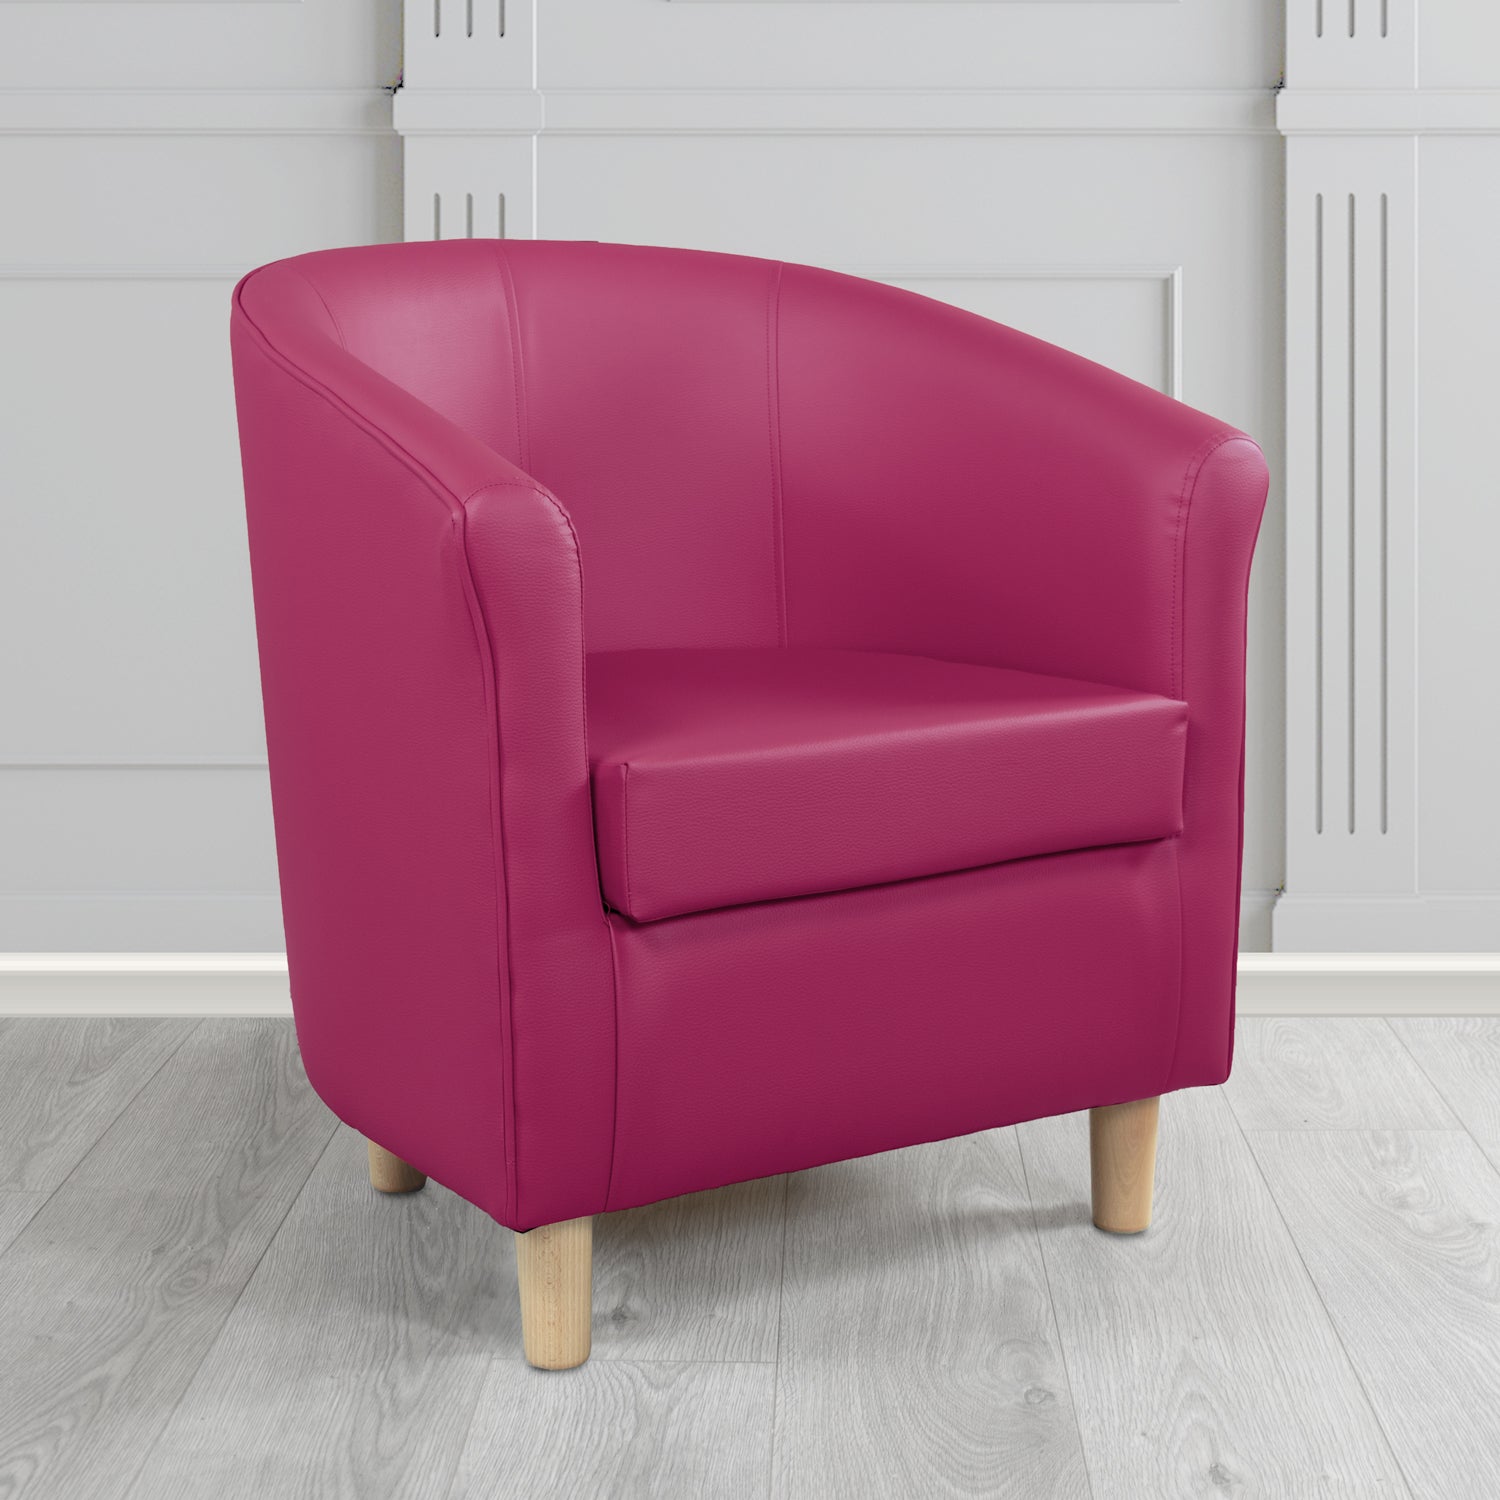 Tuscany Just Colour Raspberry Crush Antimicrobial Crib 5 Contract Faux Leather Tub Chair - The Tub Chair Shop